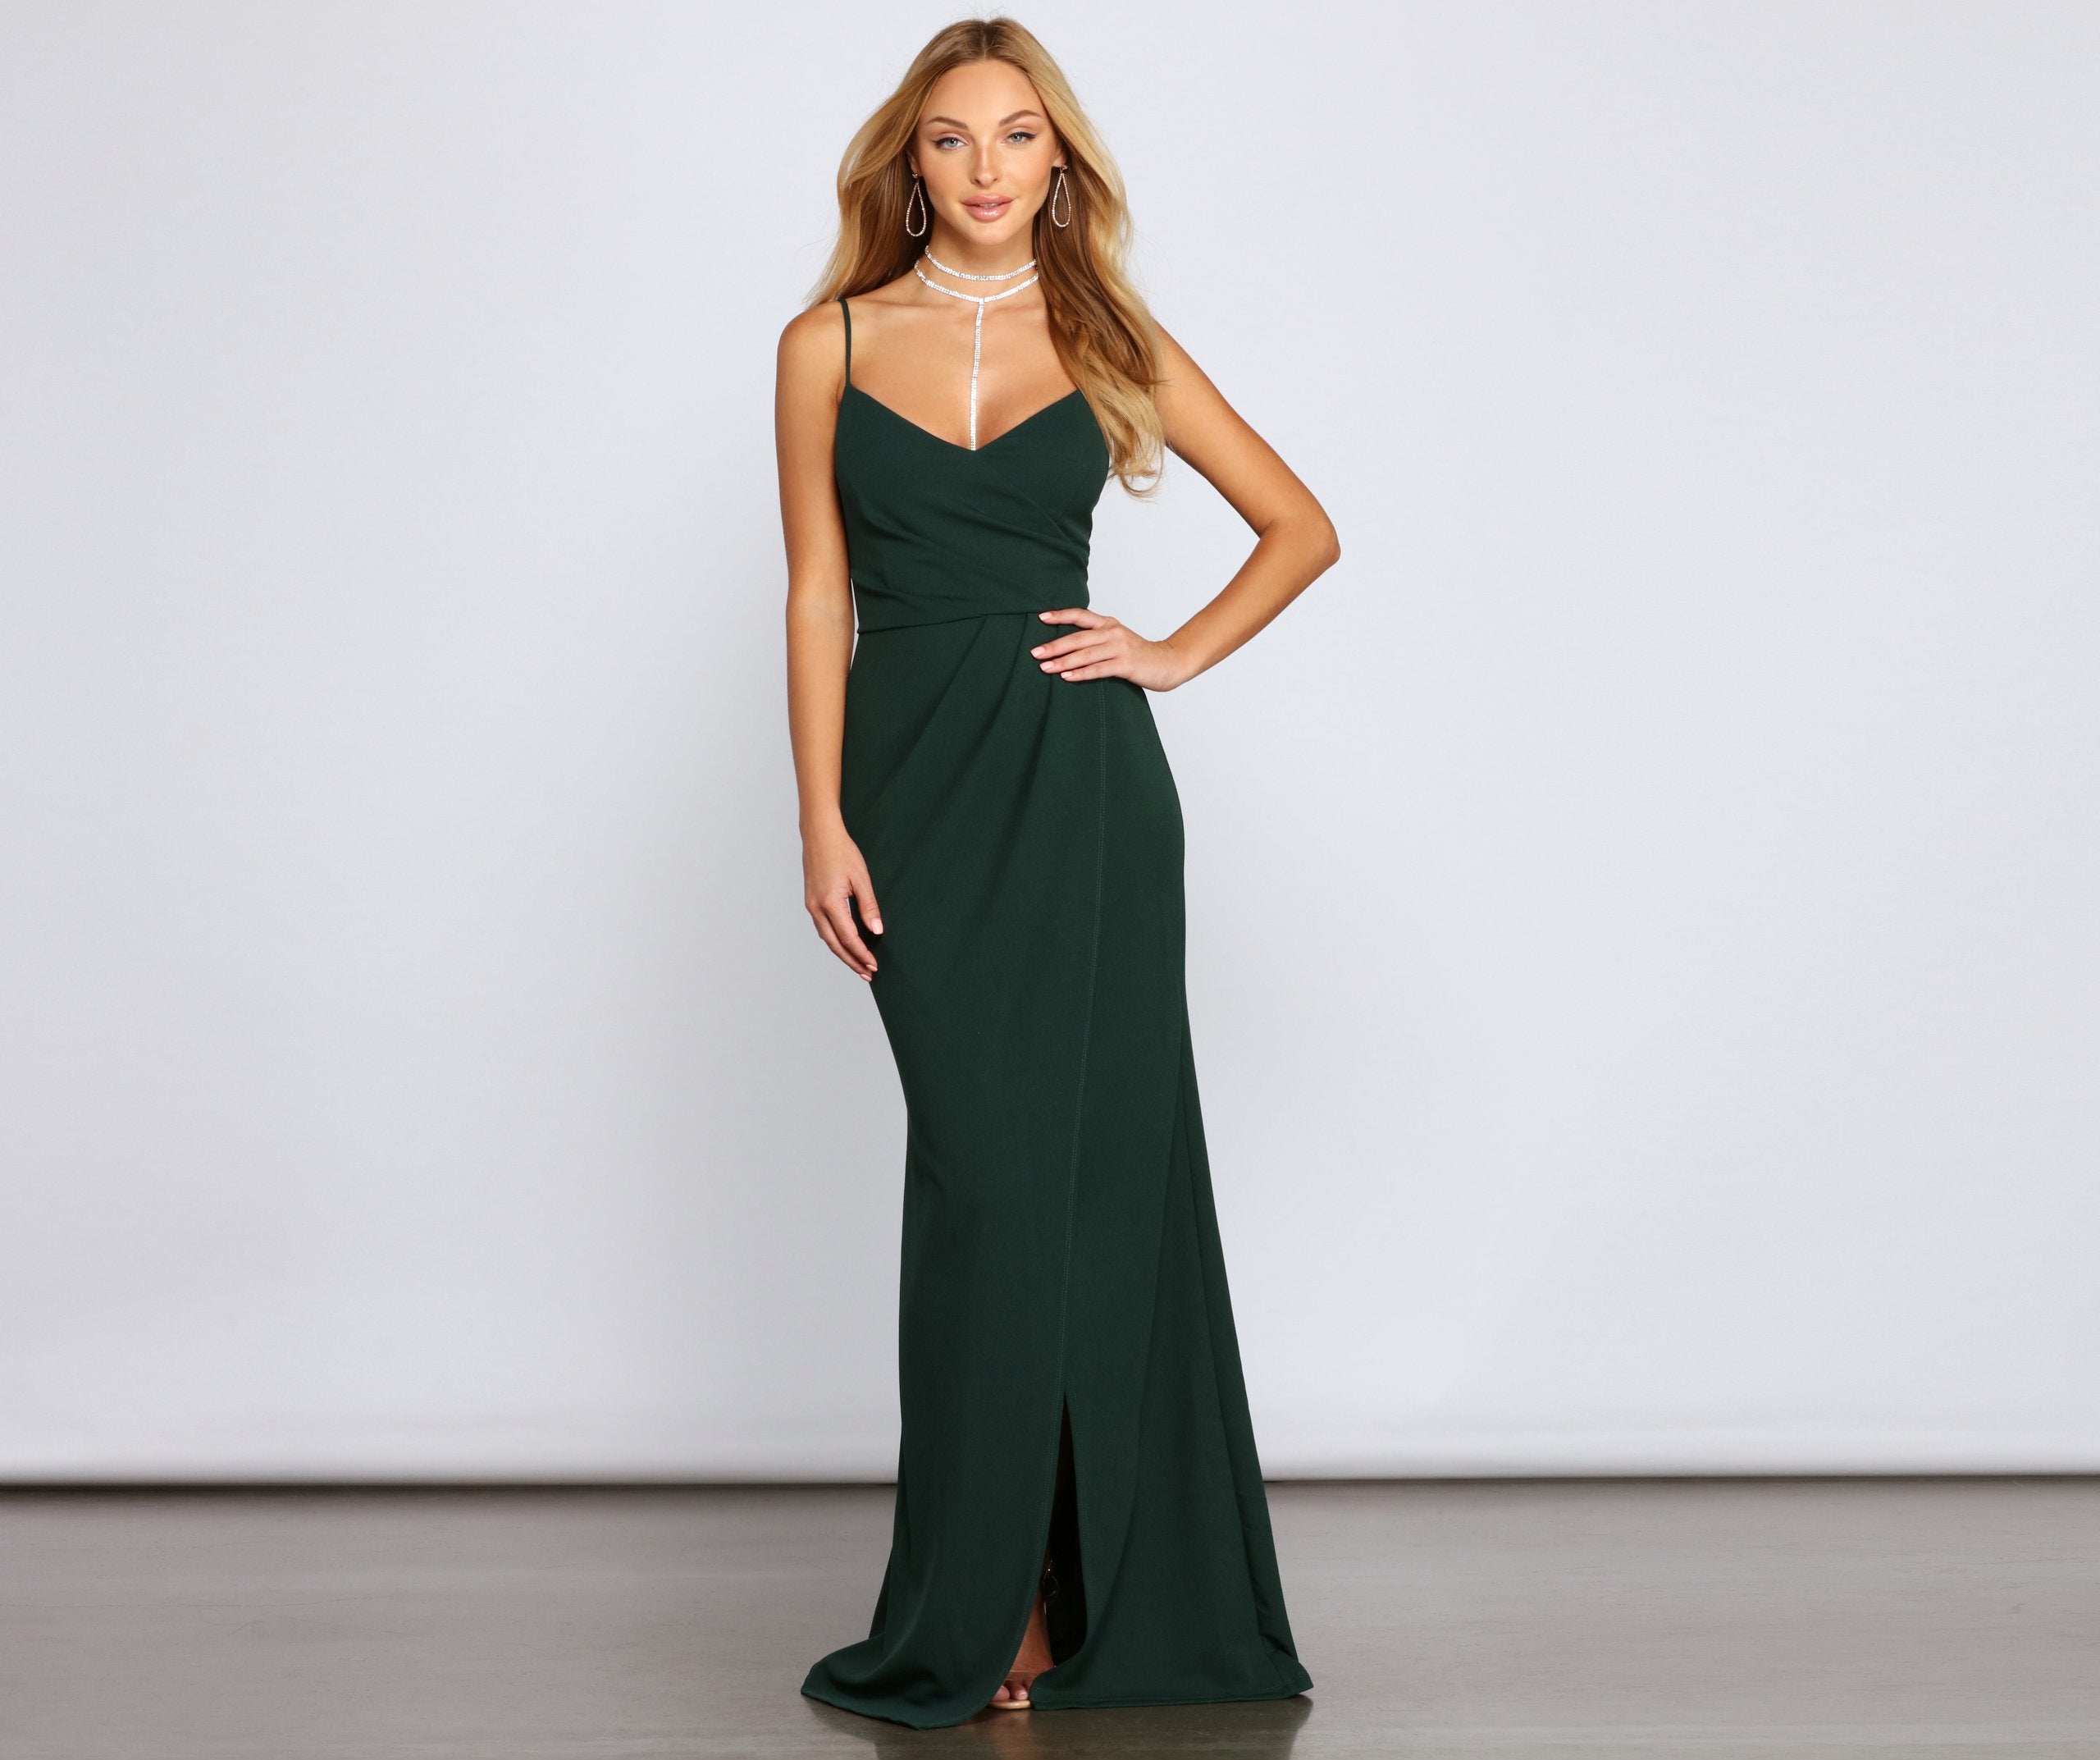 Ember Formal Wrap Mermaid Dress - Lady Occasions